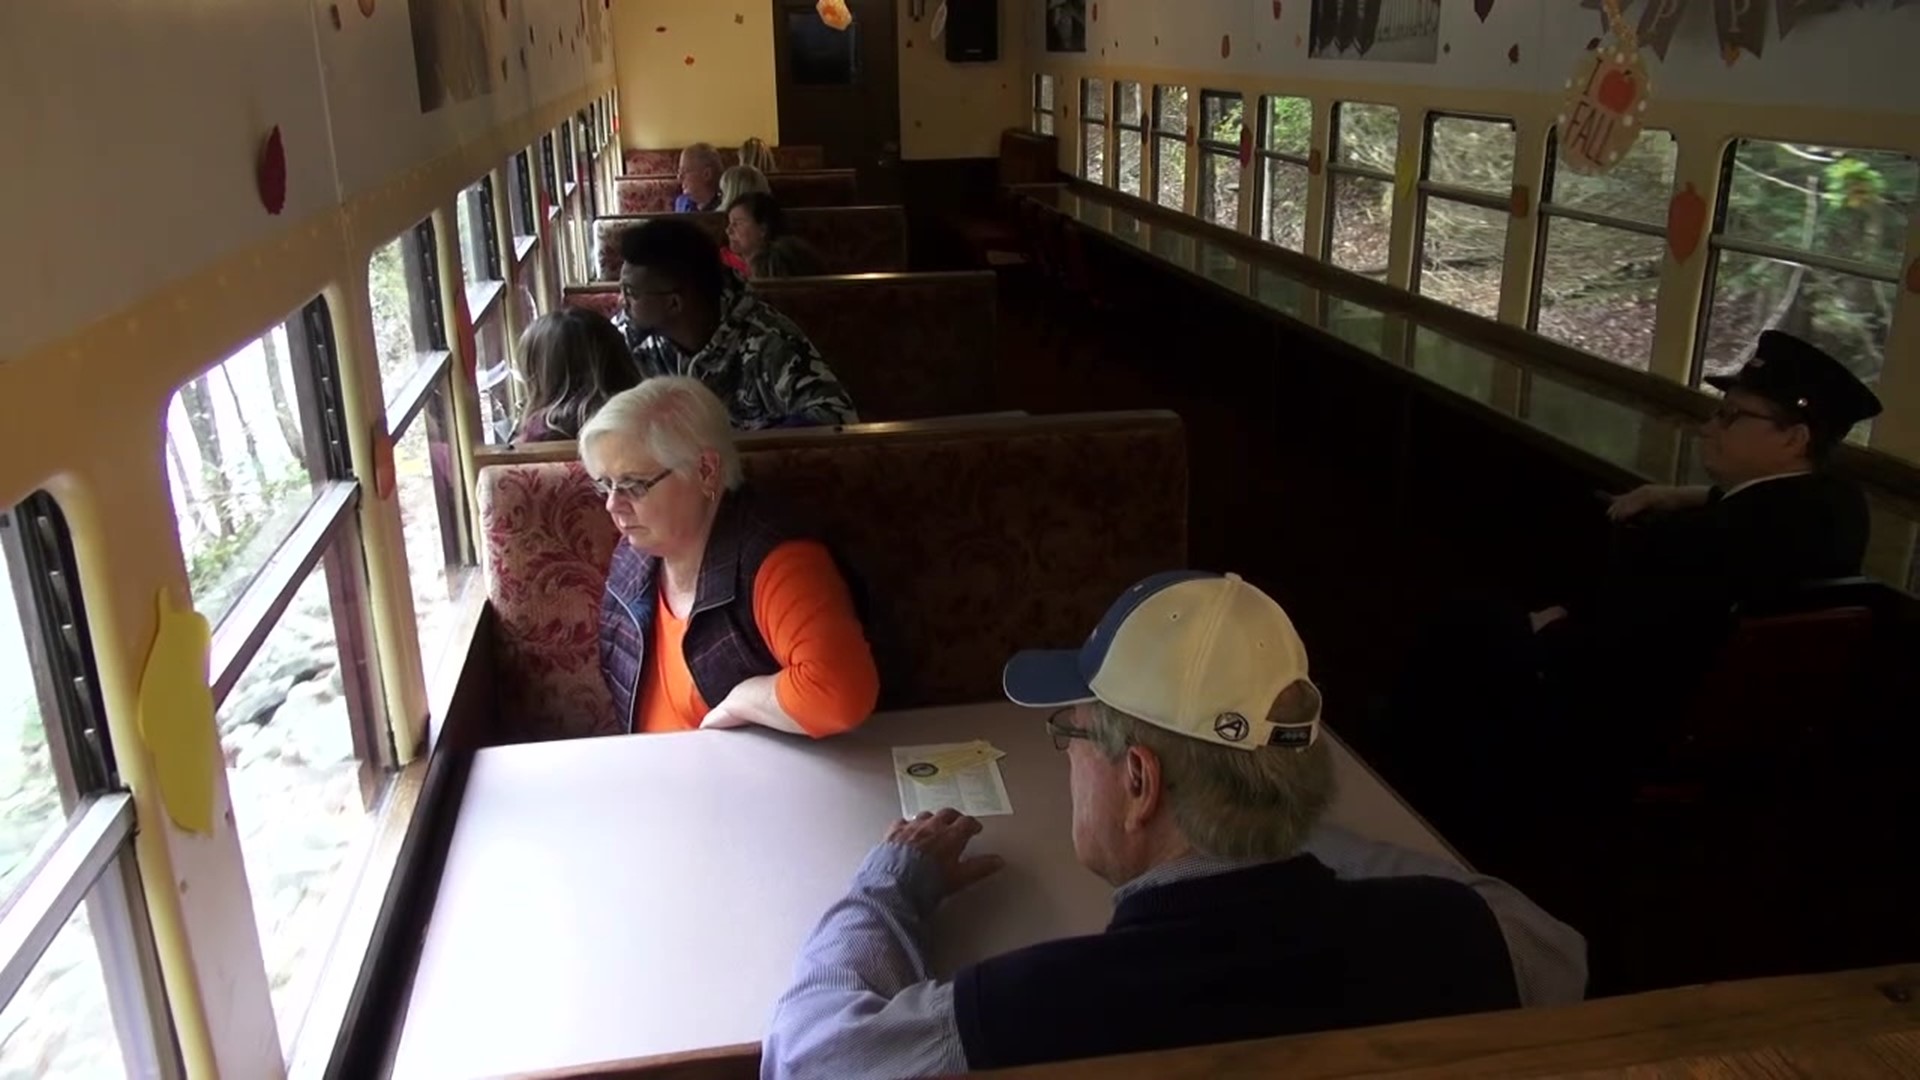 The rail cars are filled with folks out to enjoy the changing scenery and as the leaves change, those seats start to fill up quickly.